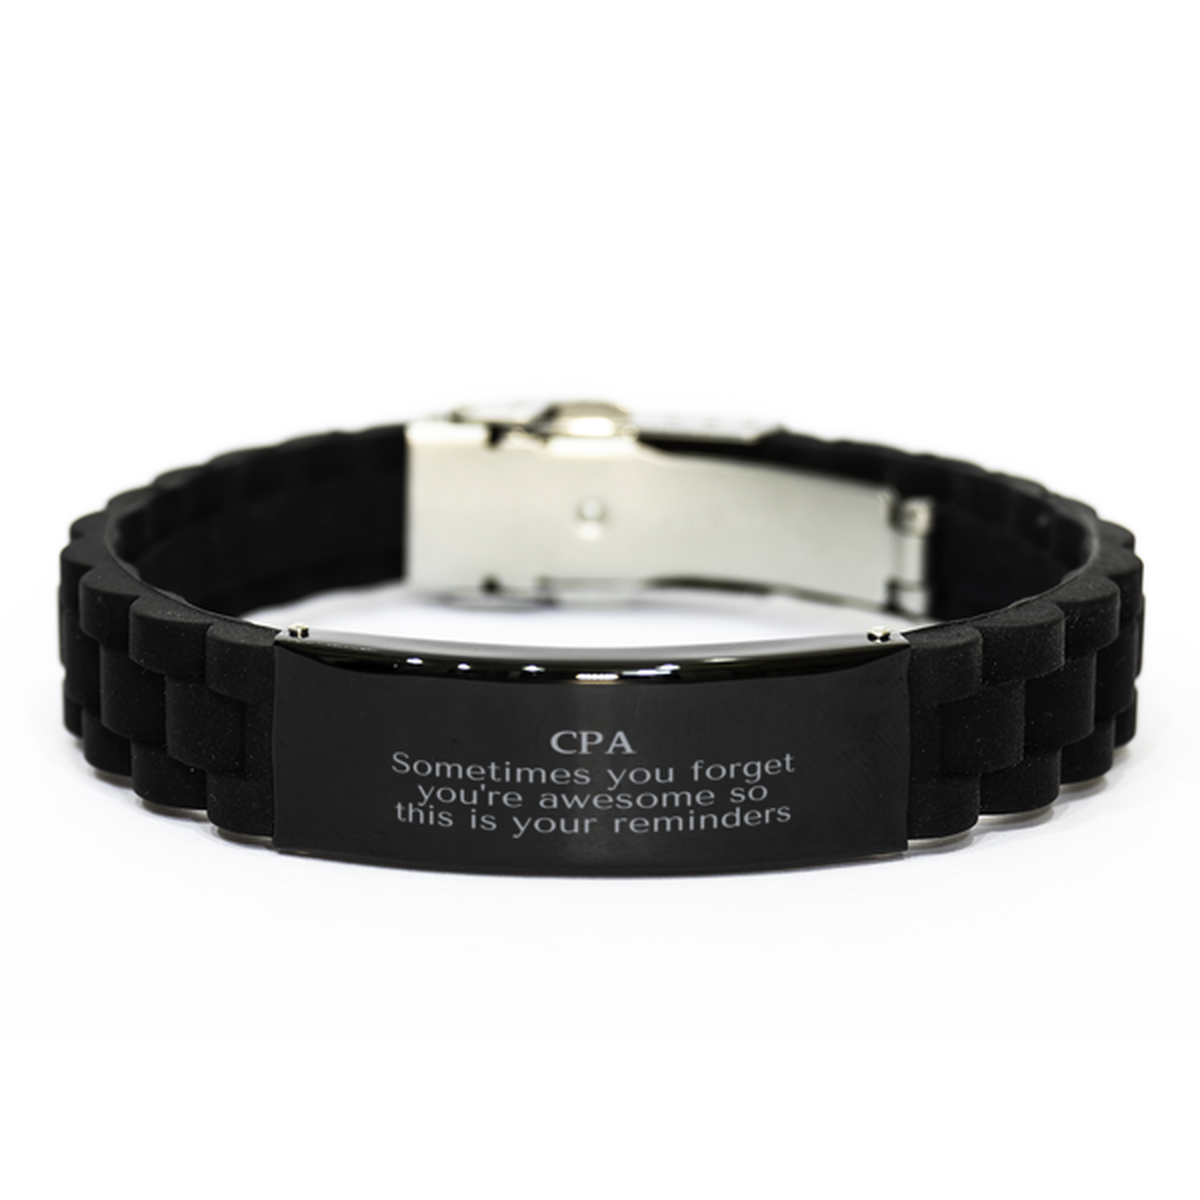 Sentimental CPA Black Glidelock Clasp Bracelet, CPA Sometimes you forget you're awesome so this is your reminders, Graduation Christmas Birthday Gifts for CPA, Men, Women, Coworkers